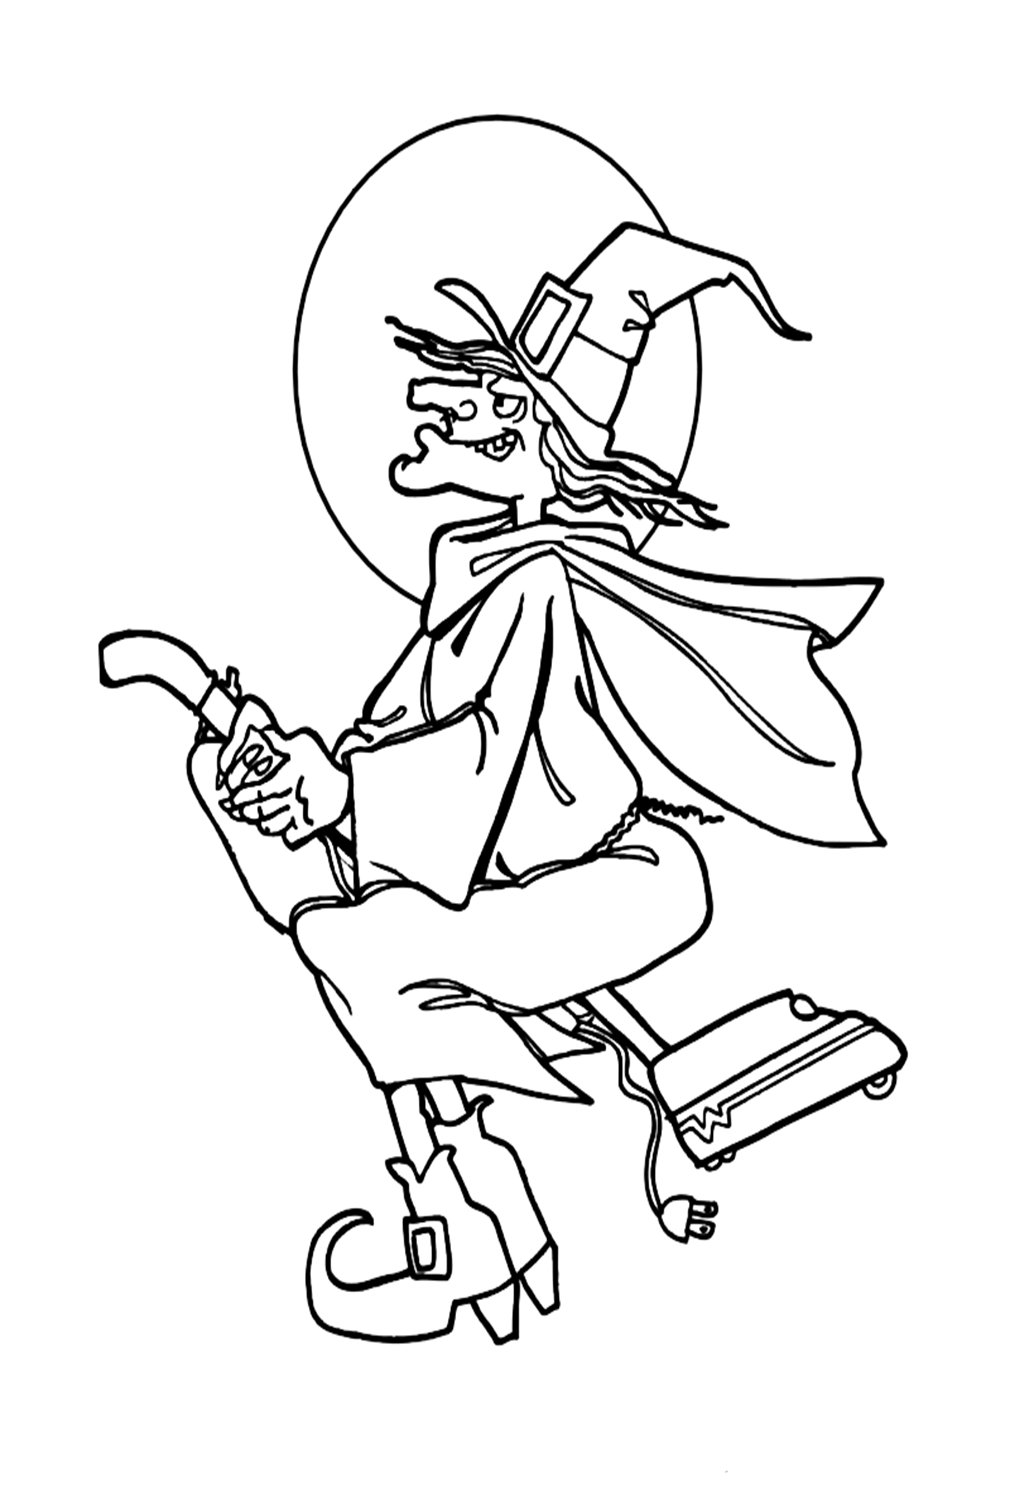 Halloween Witch Coloring Pages - Coloring Pages For Kids And Adults